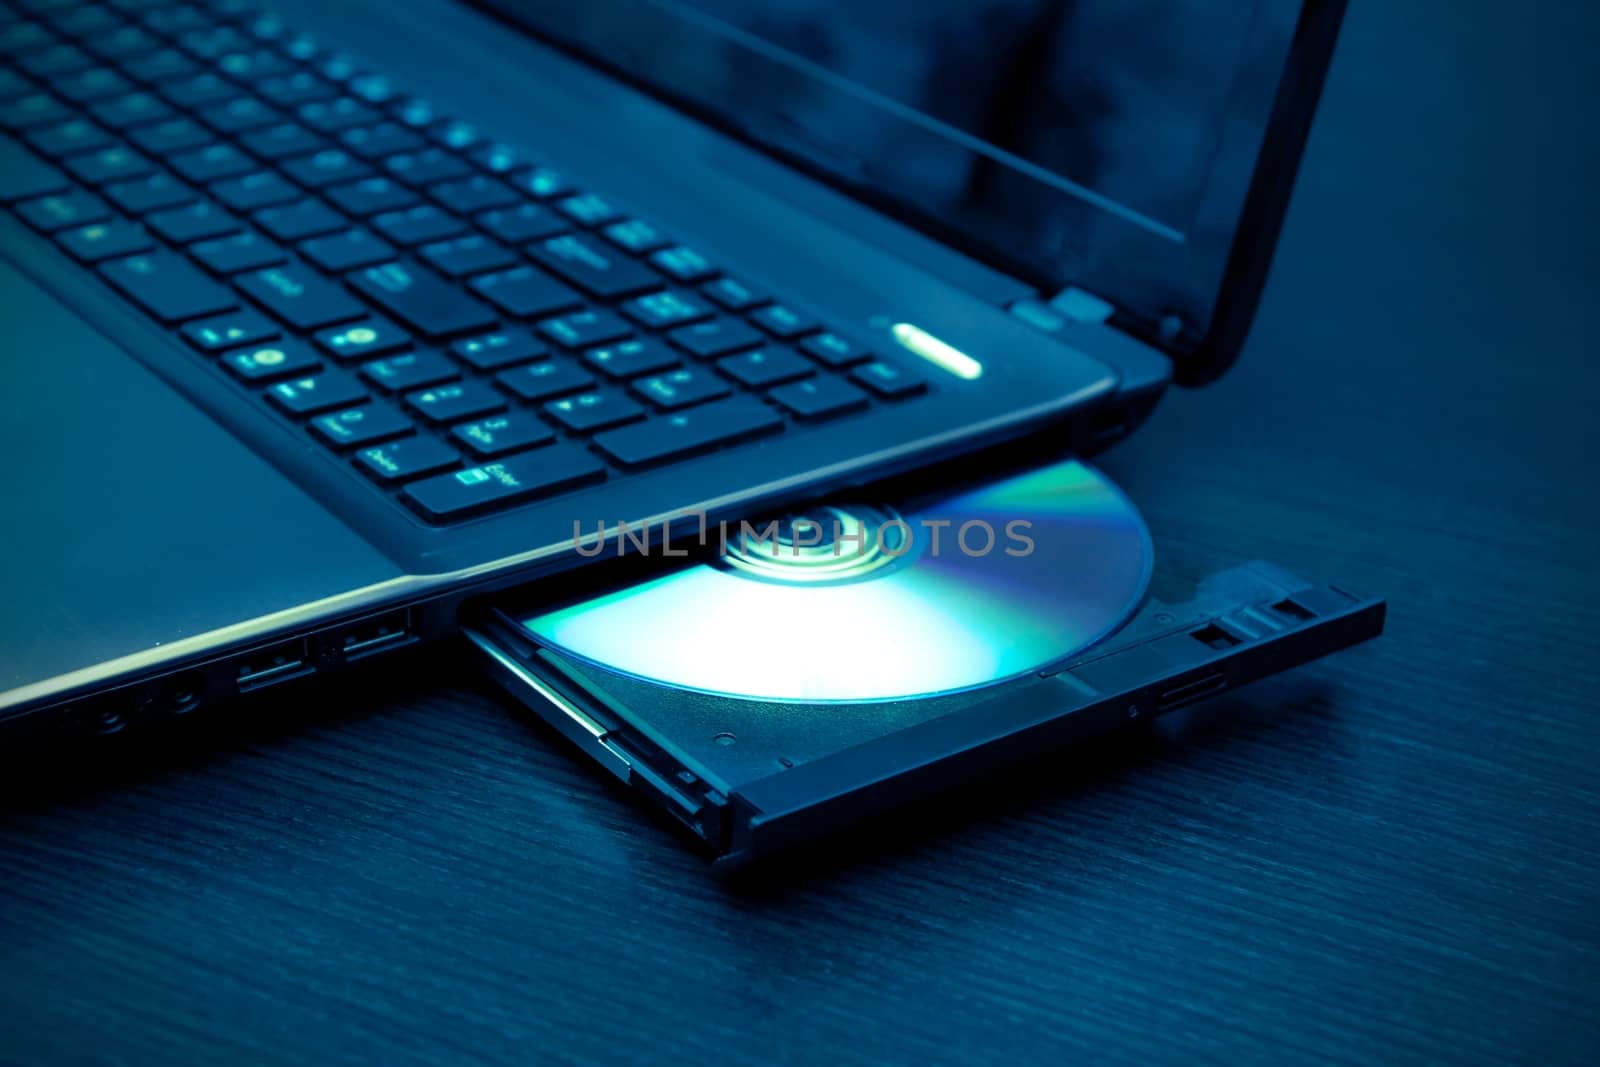 Laptop with open CD - DVD drive. Abstract light composition